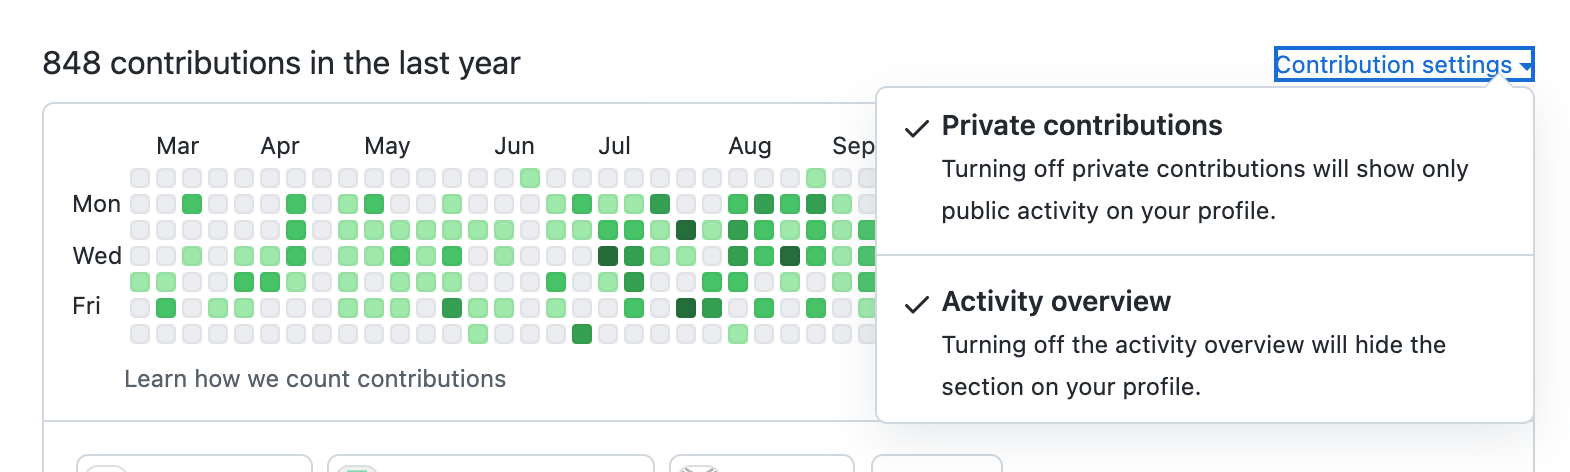 Enable private contributions displaying on contributions graph